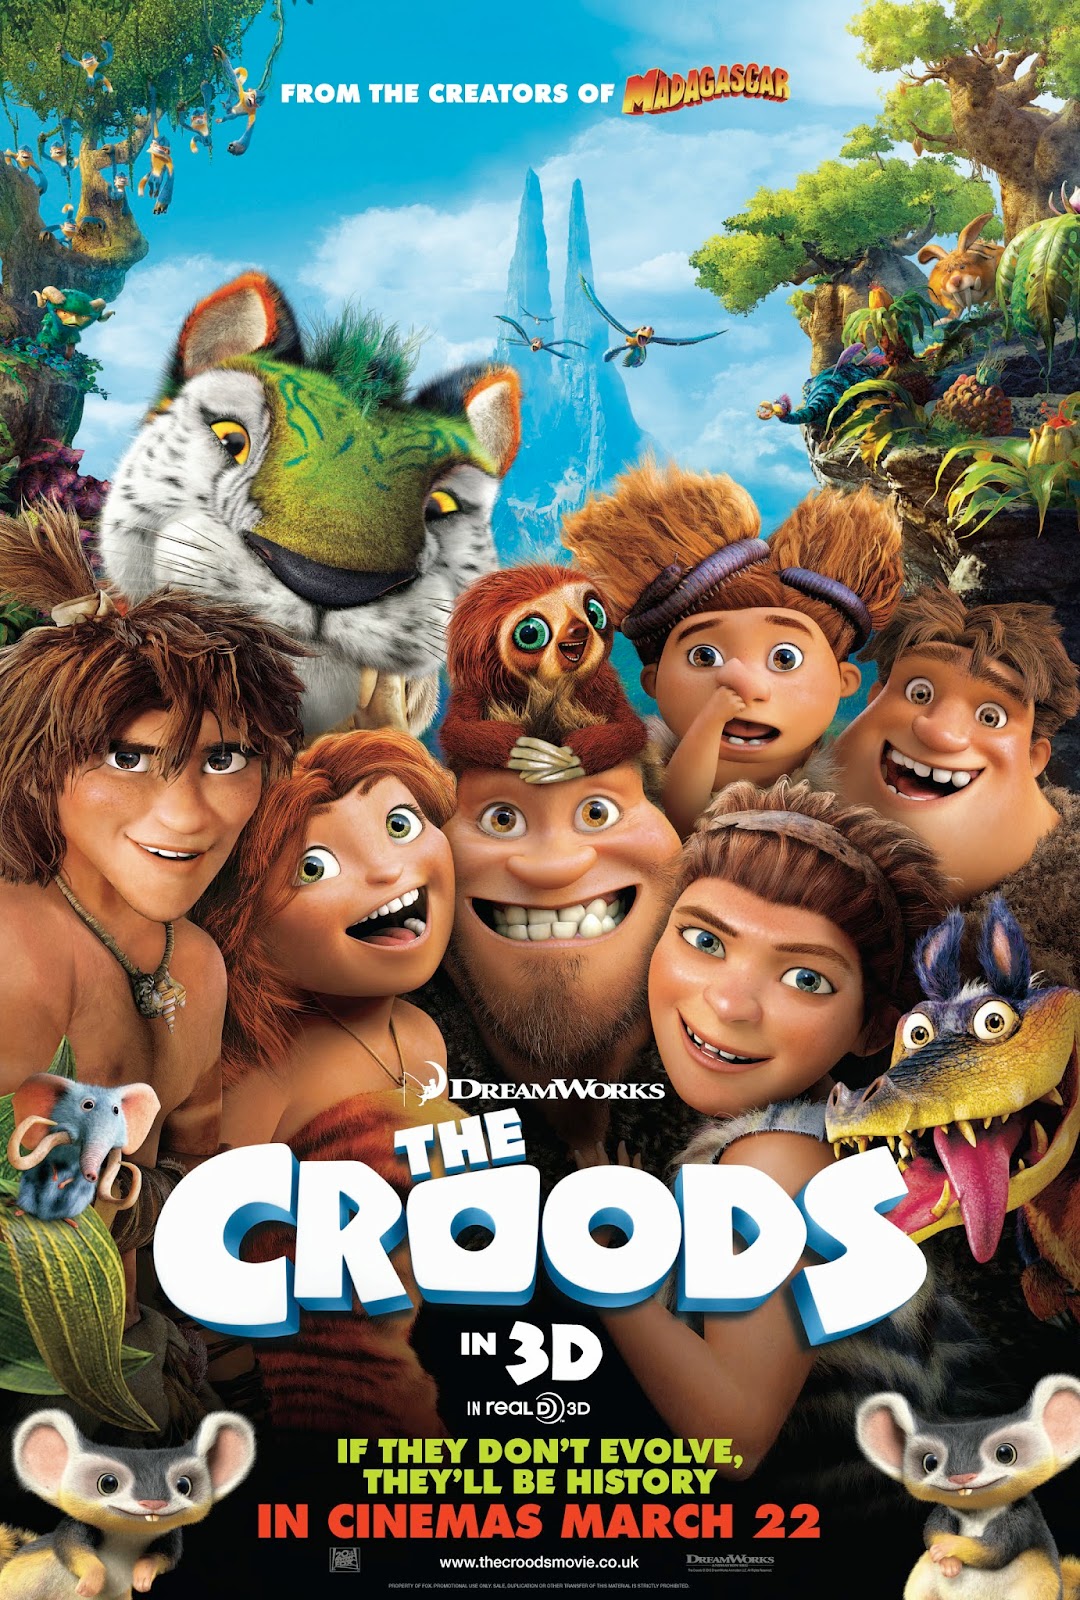 FREE DOWNLOAD  FILM  THE CROODS SUBTITLE  BAHASA INDONESIA 